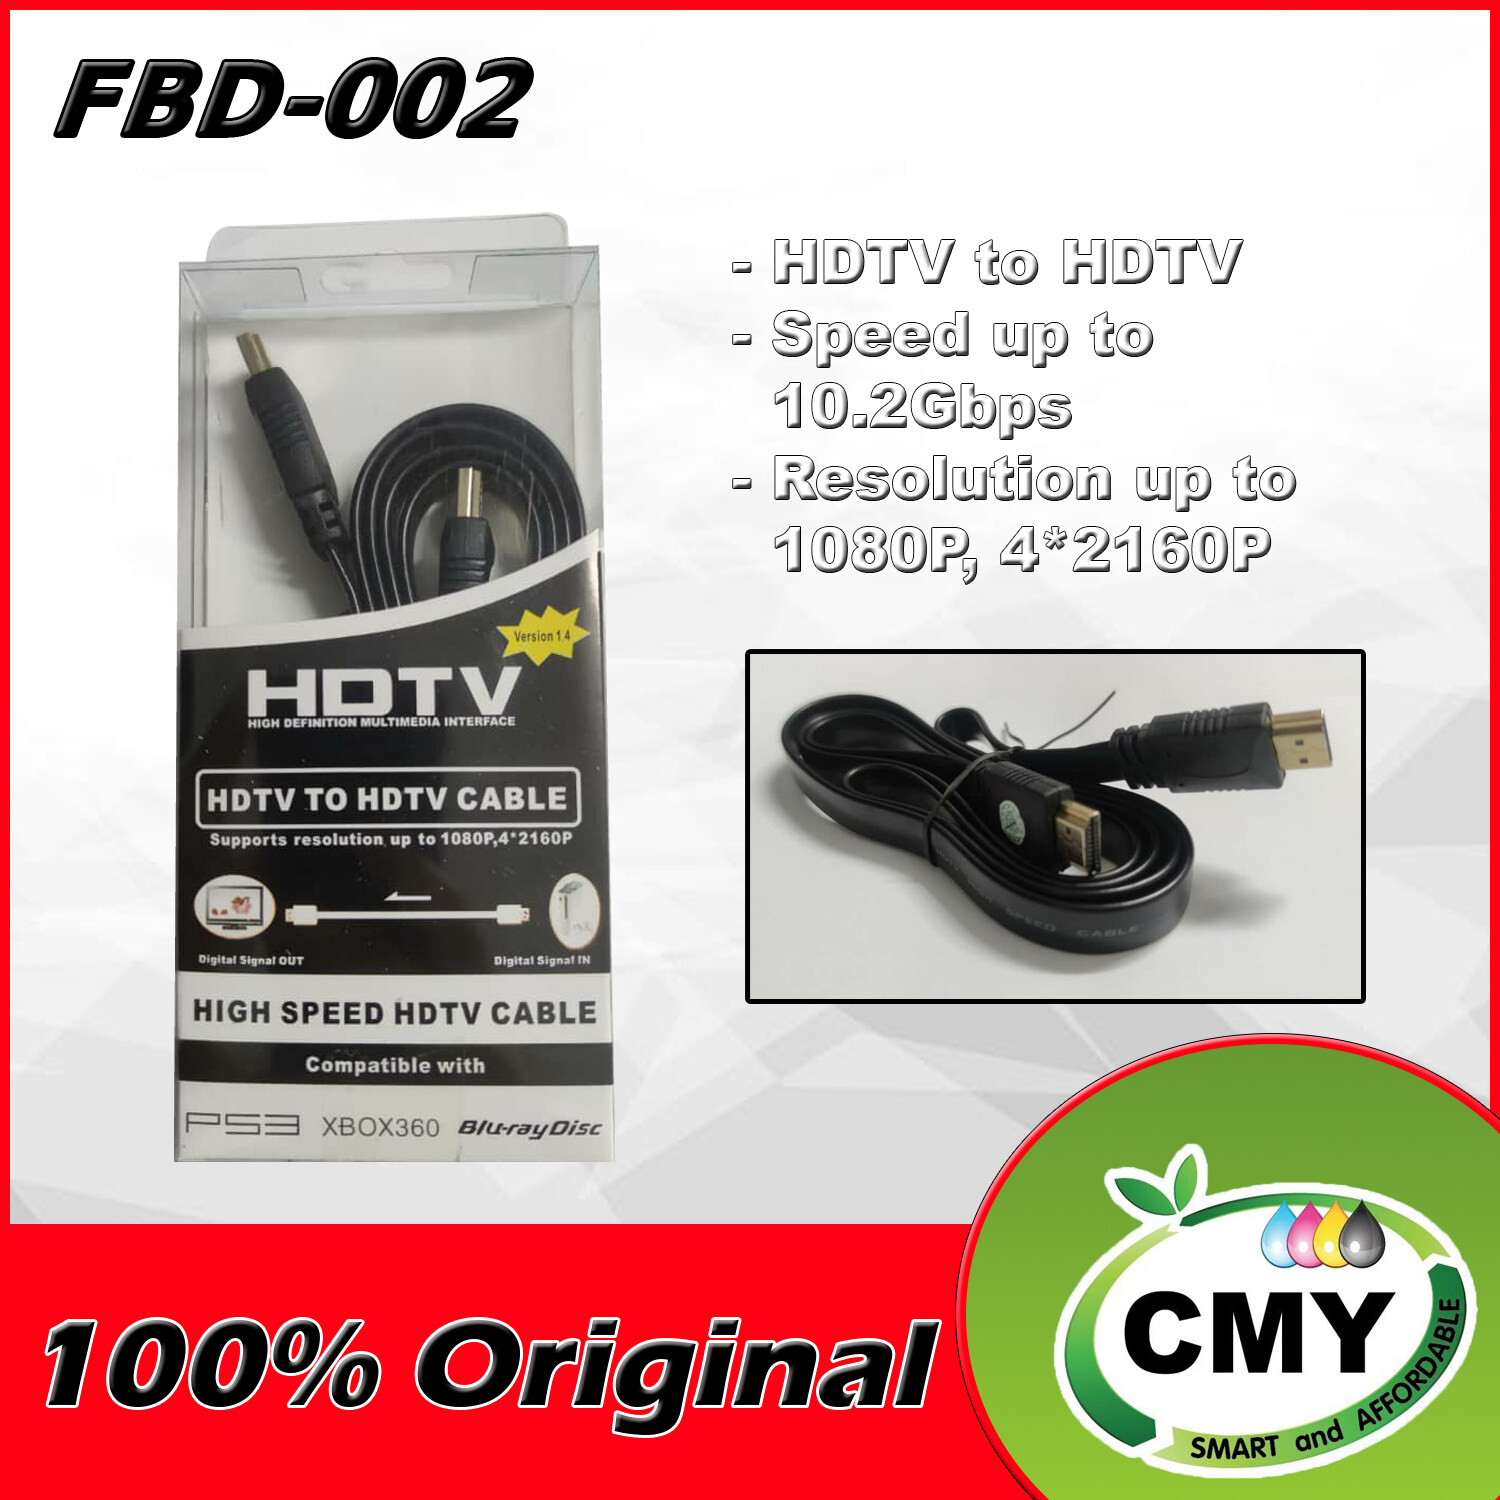 FBD-002 HTMI CABLE HIGH SPEED HTMI MALE TO HTMI MALE for HDTV LCD Projector Laptop PS3 XBOX360